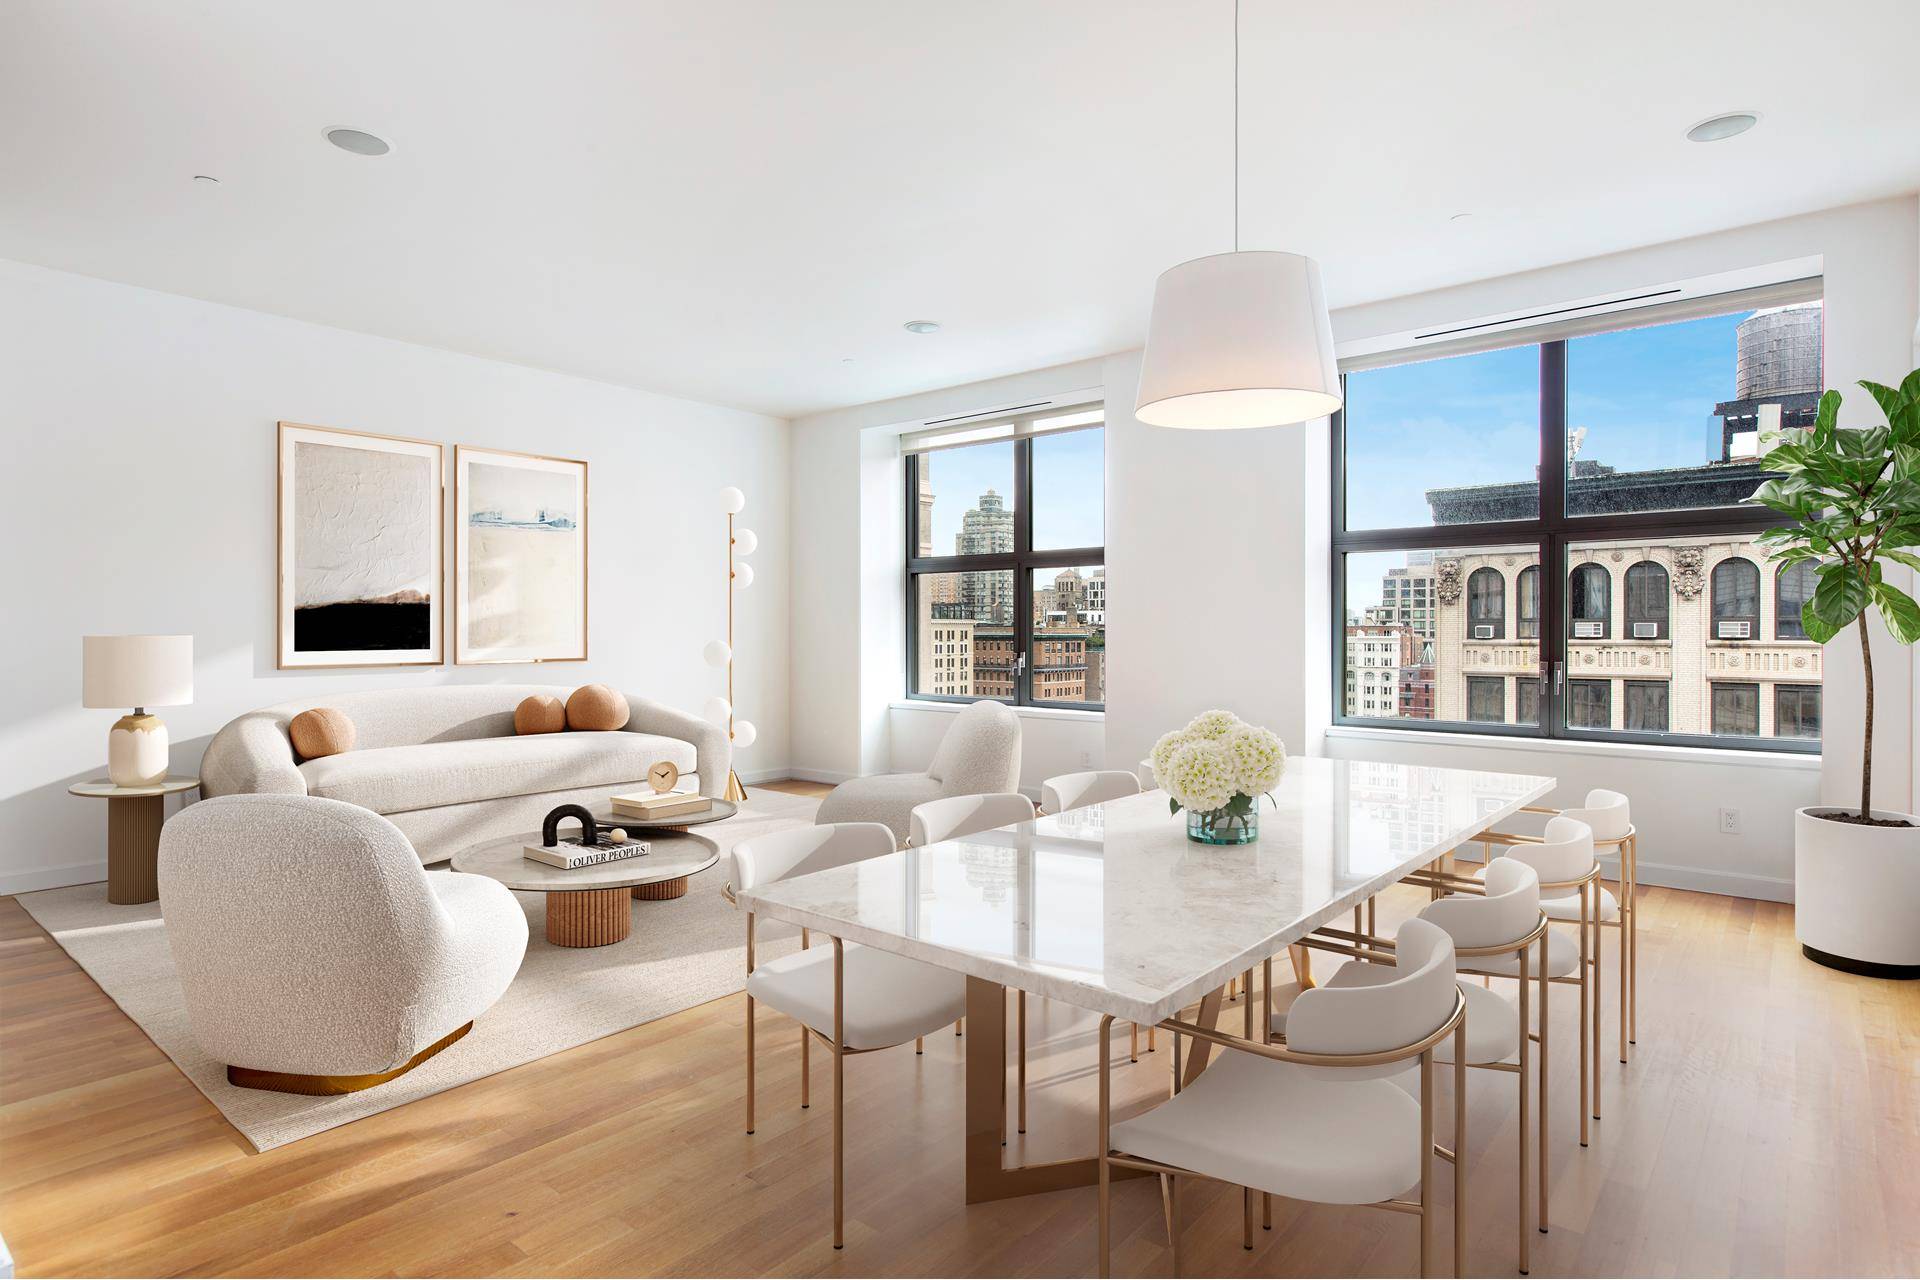 Residence 14B at 240 Park Avenue South is a beautifully appointed 2, 139 square foot 3 bedroom 3.